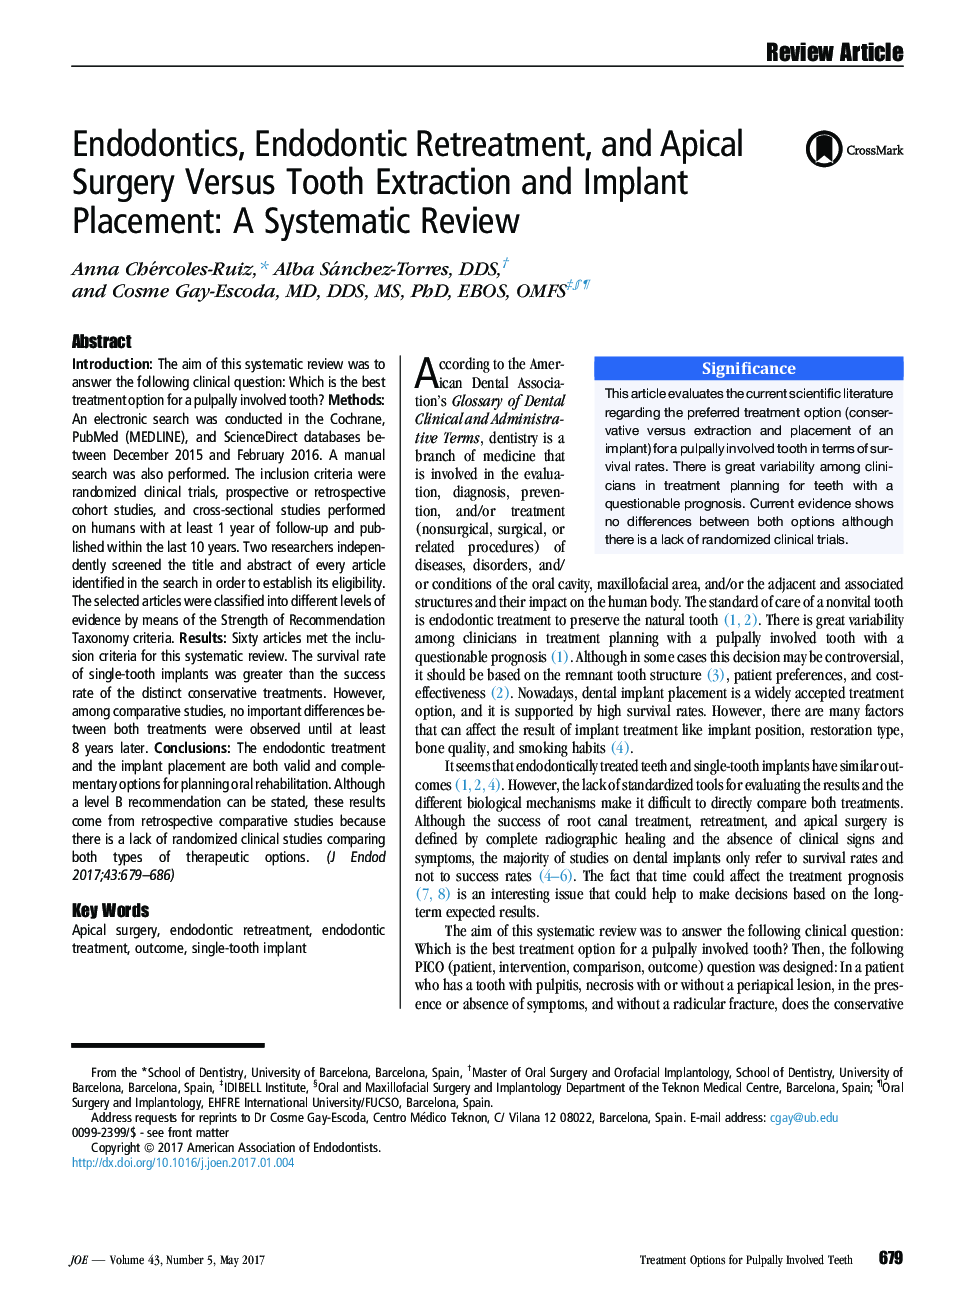 Endodontics, Endodontic Retreatment, and Apical Surgery Versus Tooth Extraction and Implant Placement: A Systematic Review